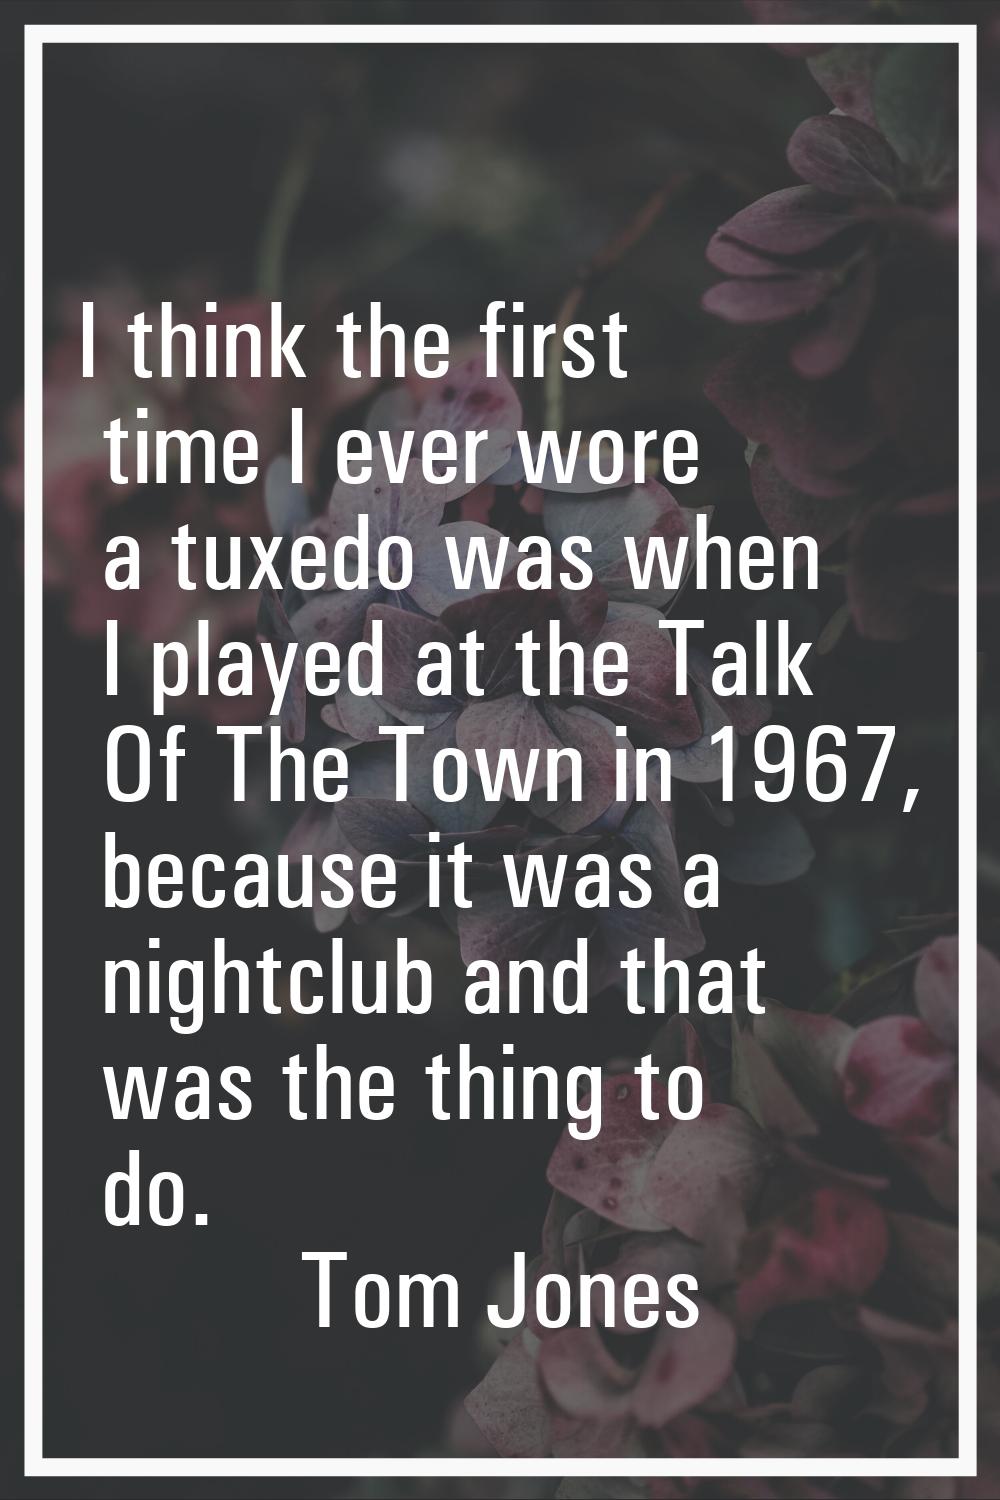 I think the first time I ever wore a tuxedo was when I played at the Talk Of The Town in 1967, beca